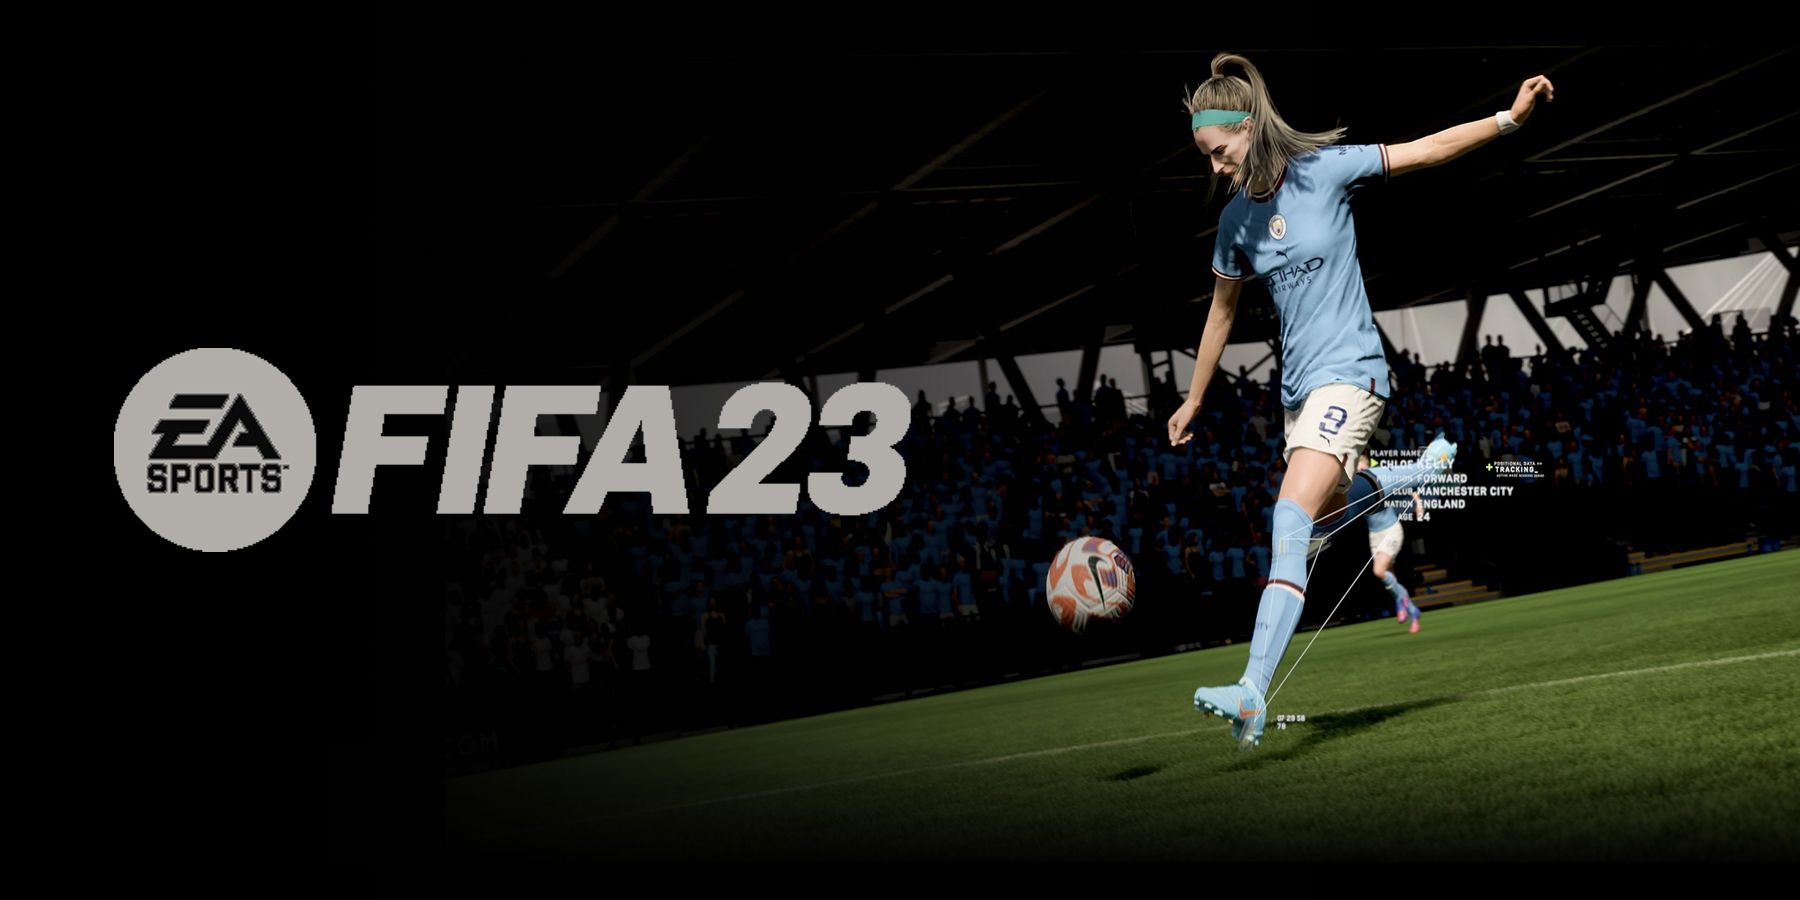 FIFA 23 trailer reveals cross-play, Men's and Women's World Cups, Women's  Club teams and more